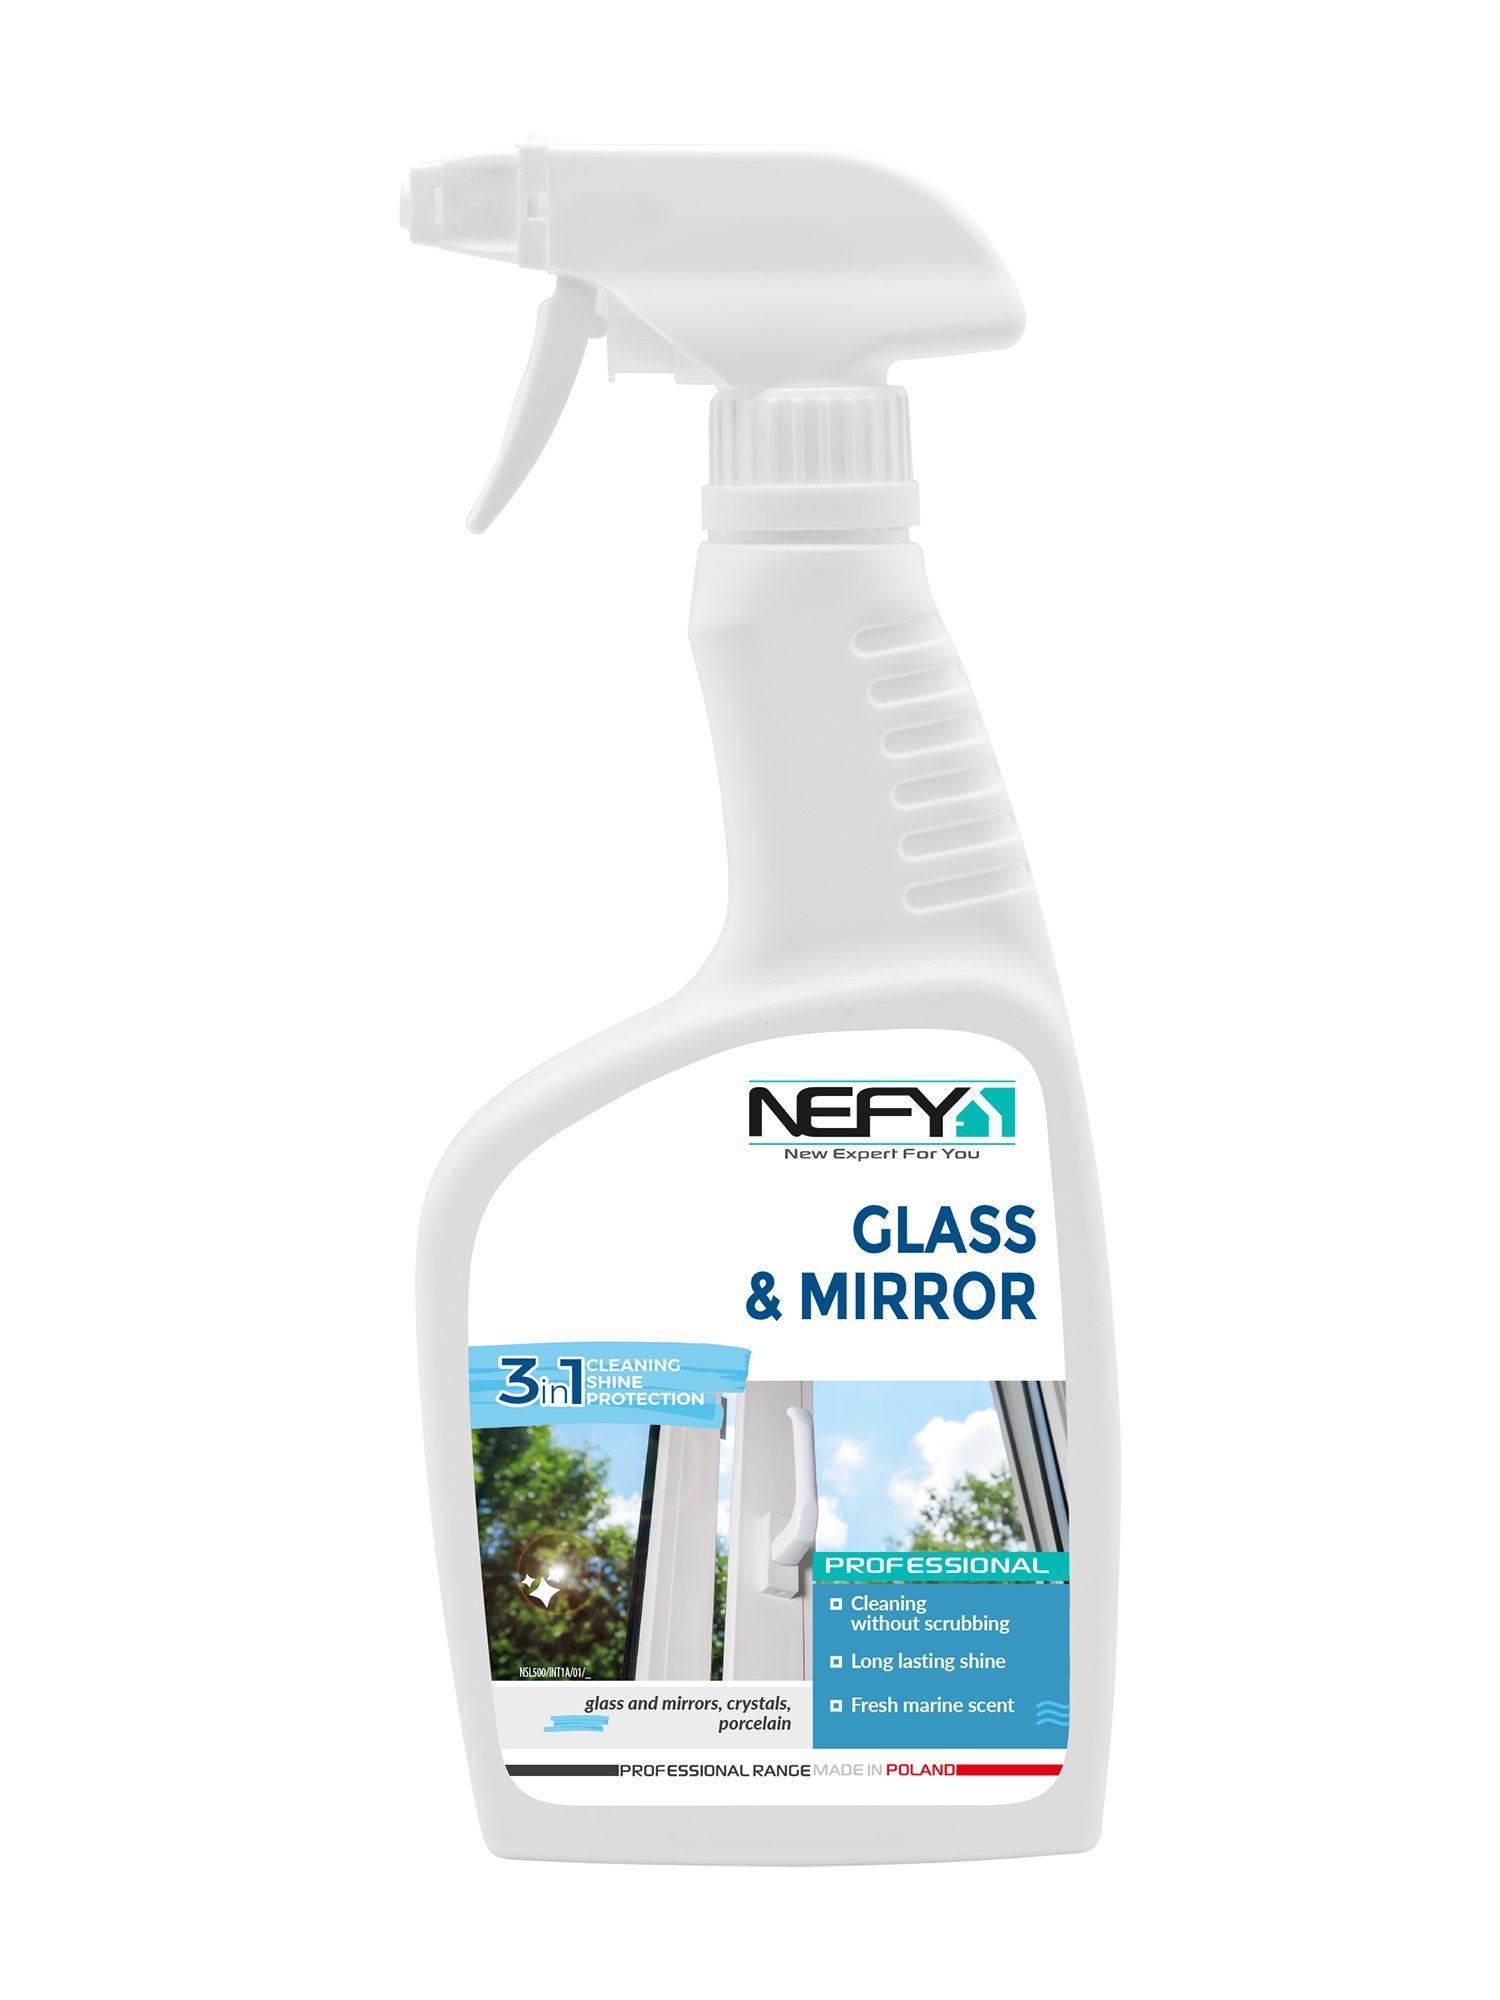 Glass and mirror cleaner